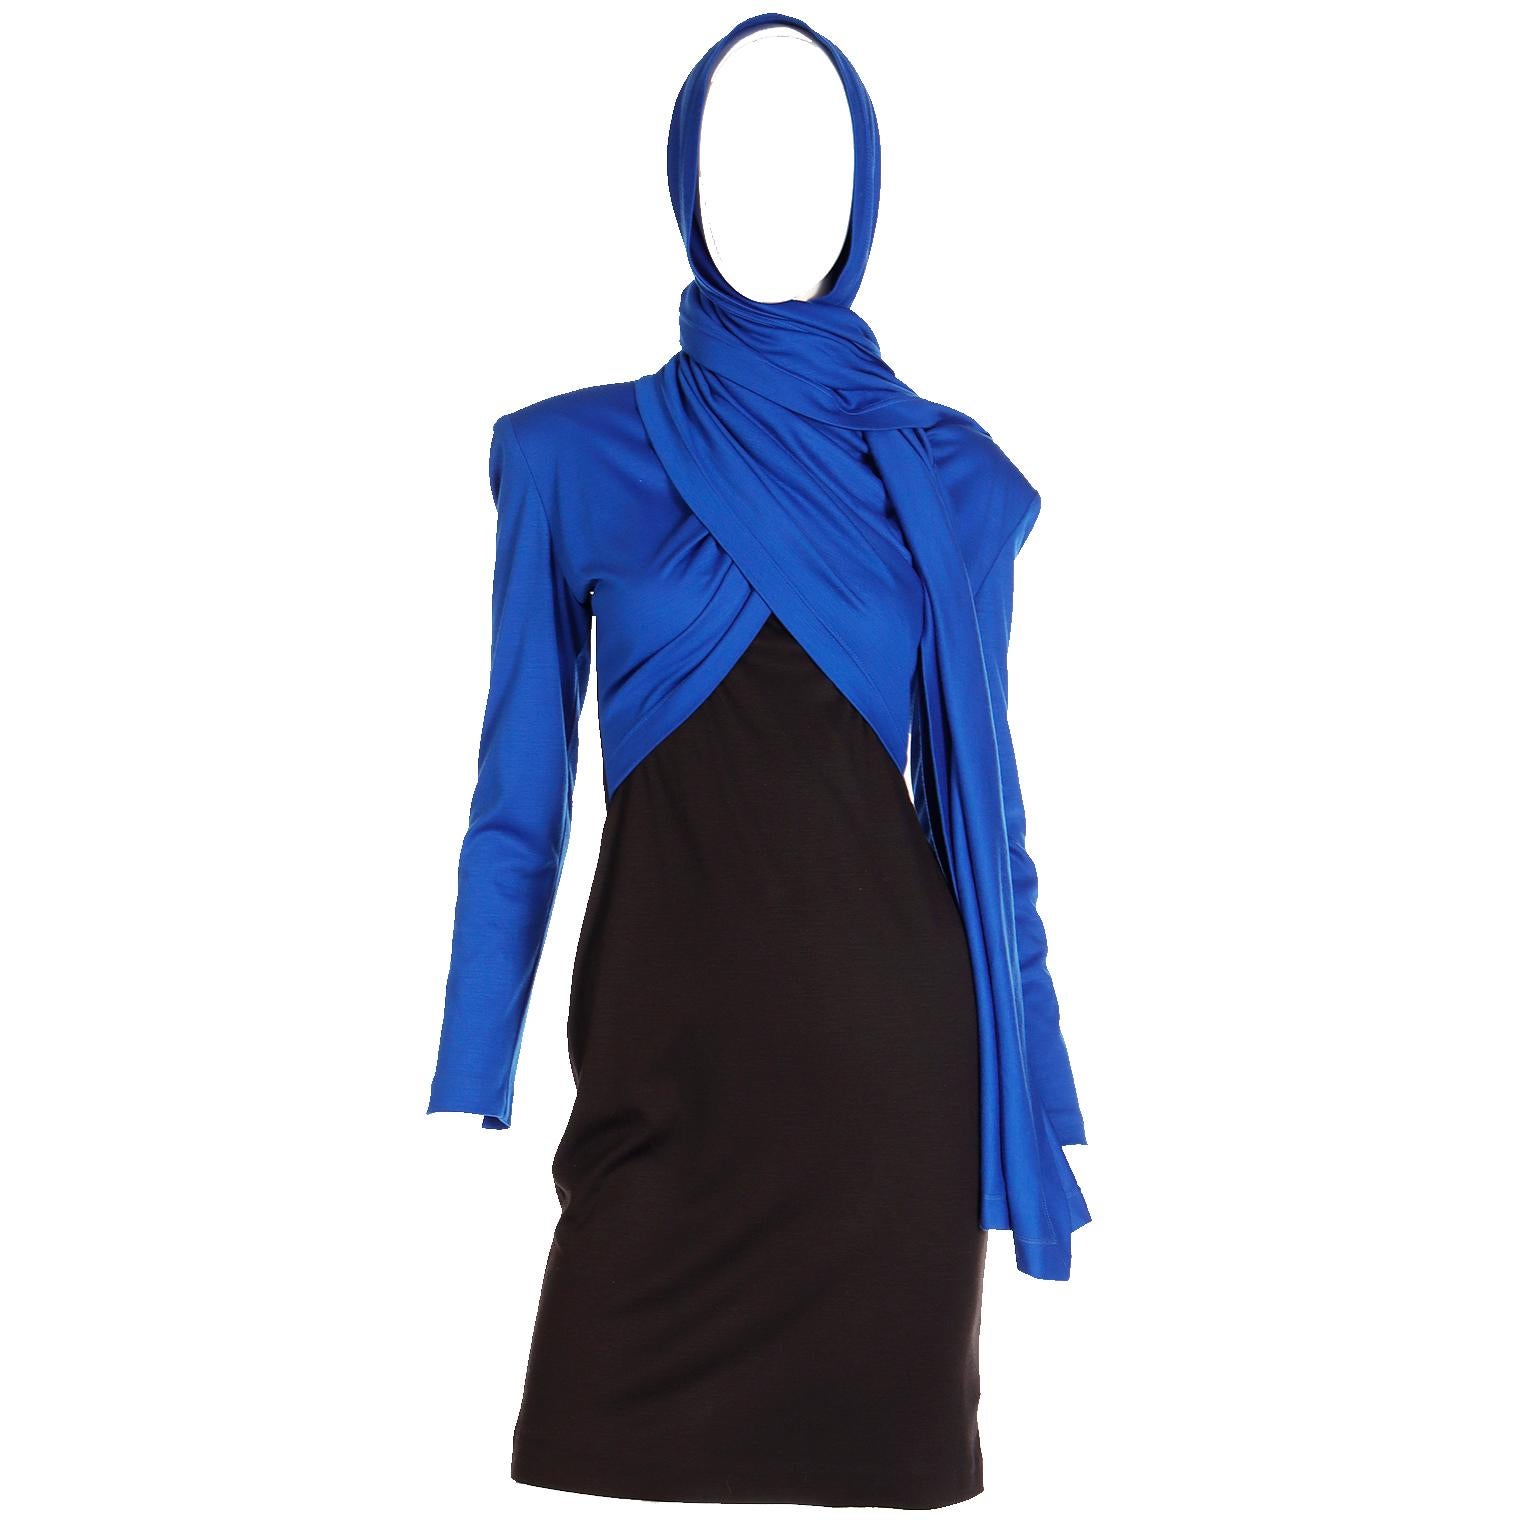 FW 1989 Patrick Kelly Runway Dress in Blue & Black Knit with Head Scarf  For Sale 14